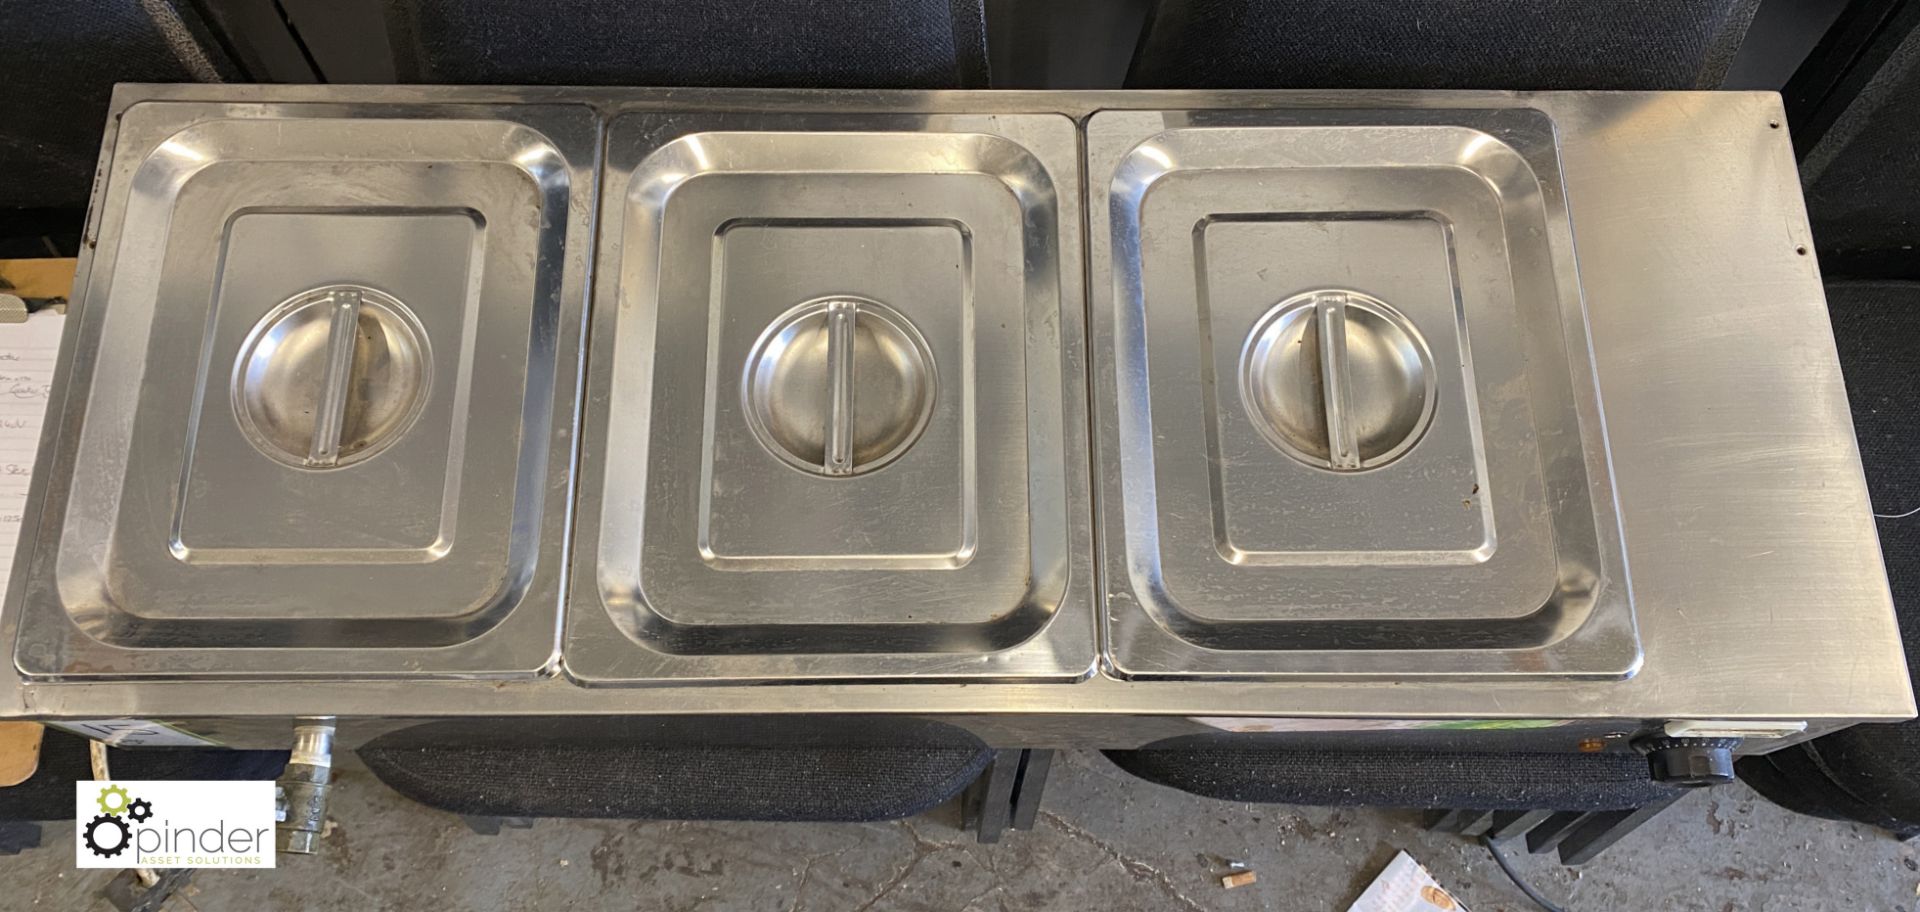 Stainless steel counter top 3-pan Bain Marie, 240volts, 950mm x 360mm x 170mm - Image 2 of 4